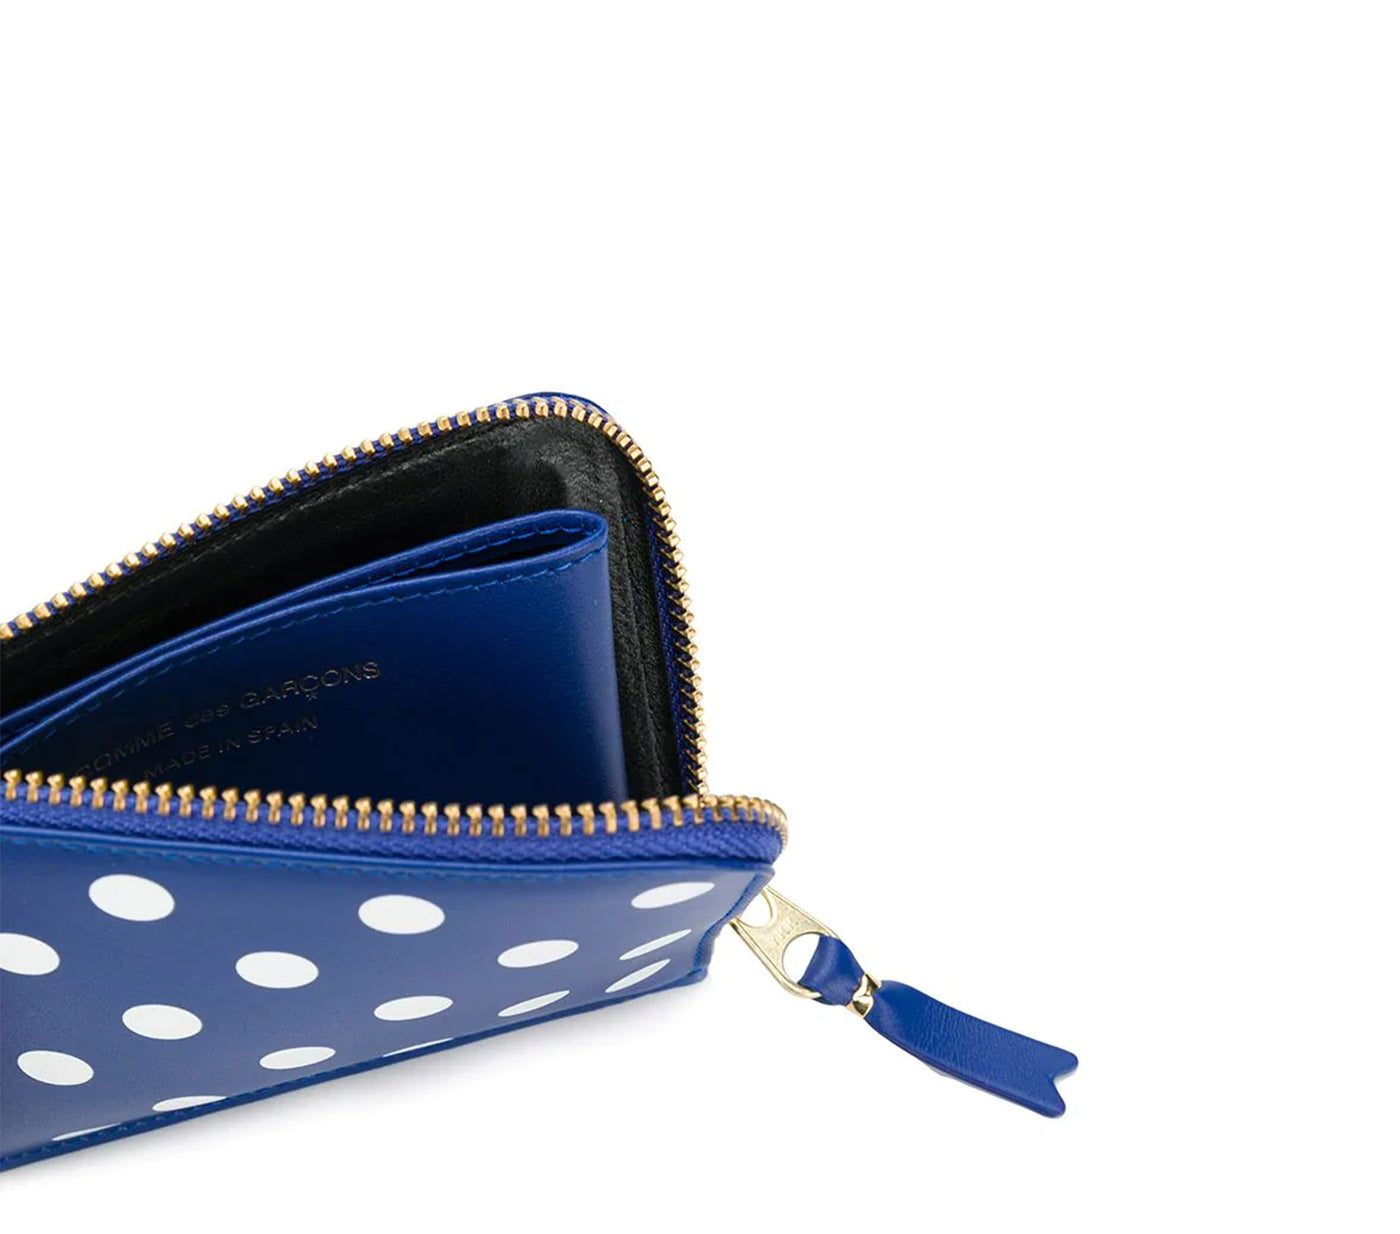 Wallet Dot Leather (Navy)